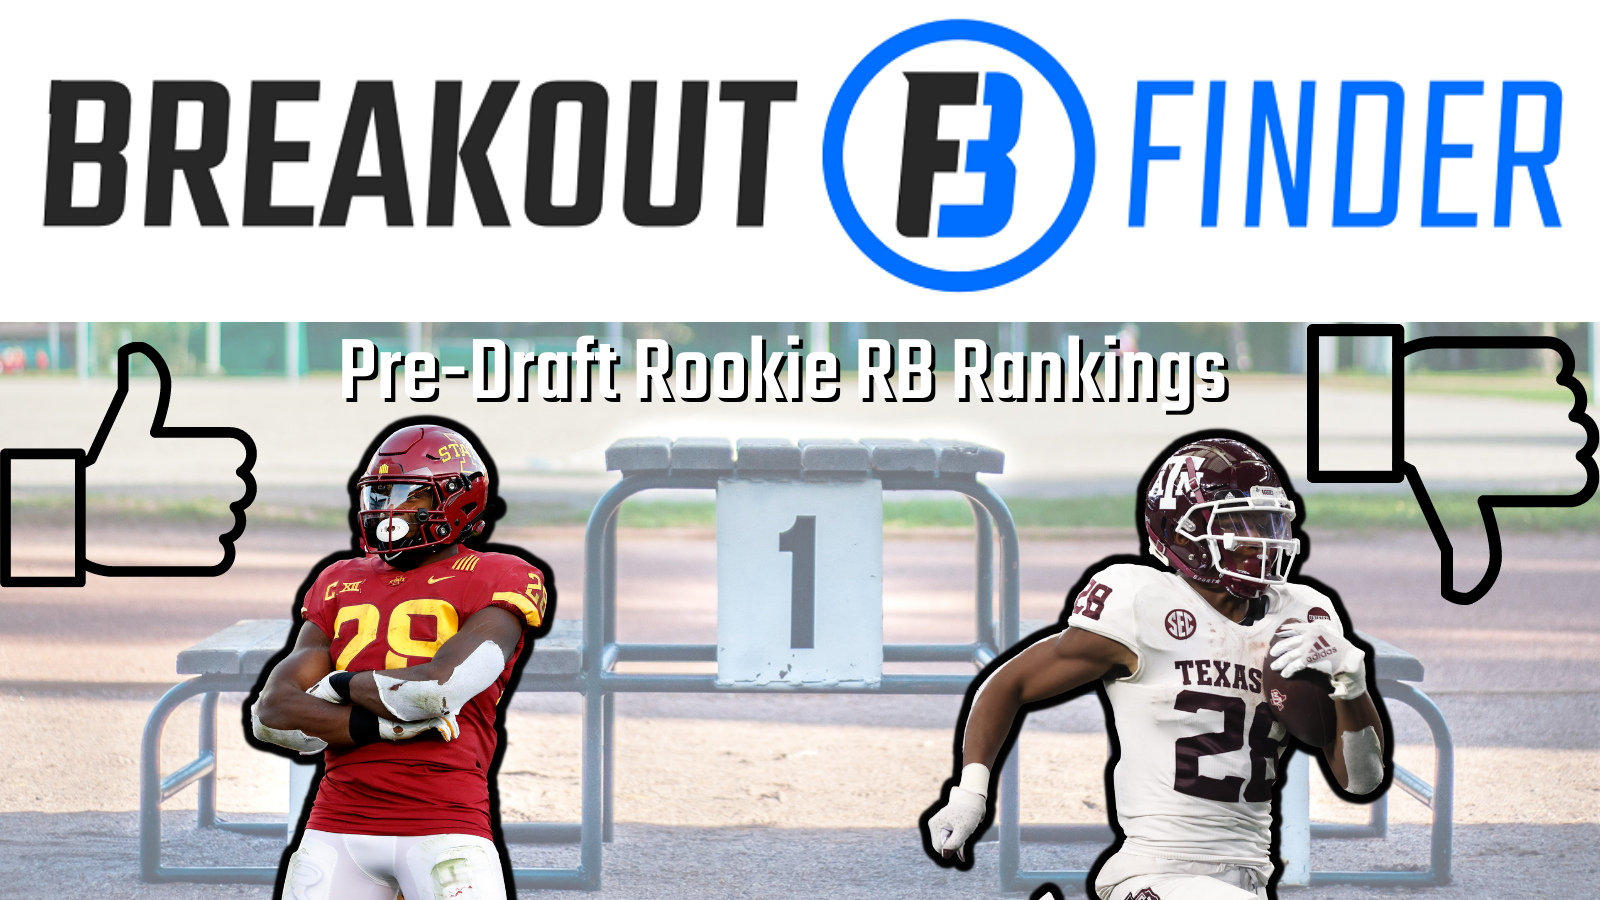 The Official Pre-Draft 2022 Rookie Running Back Rankings